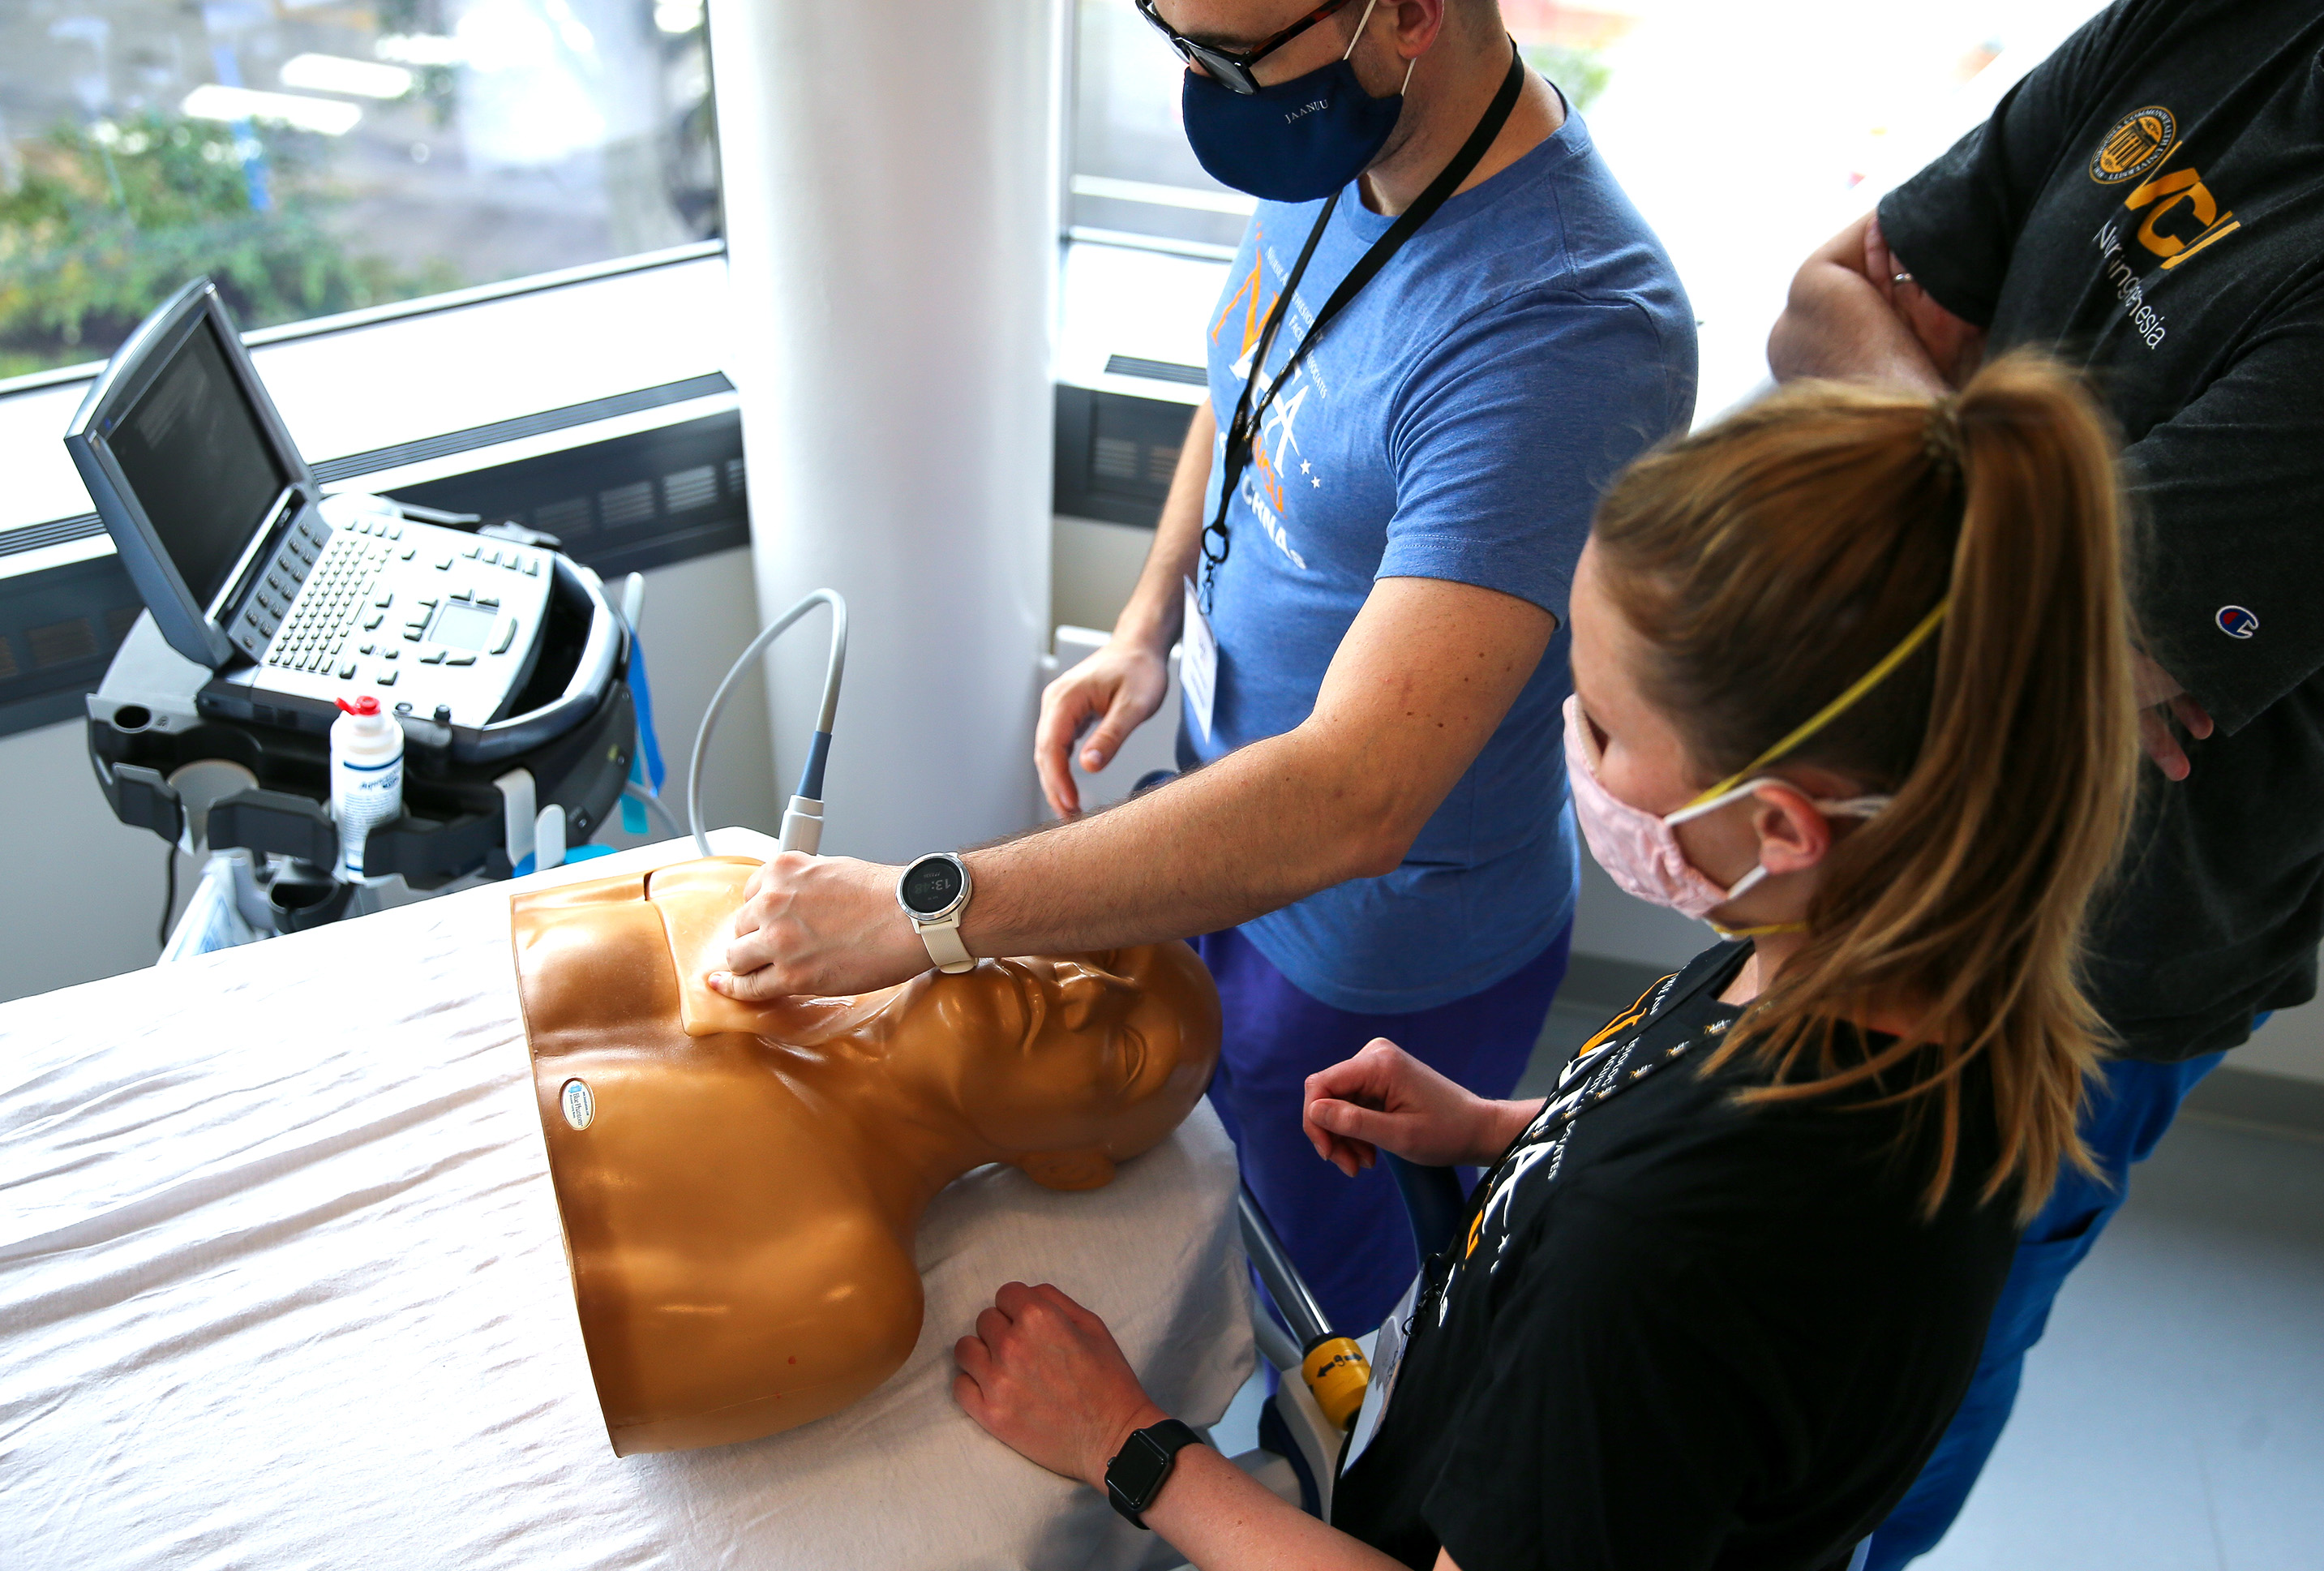 Students practicing ultrasound techniques on simulation mannequin